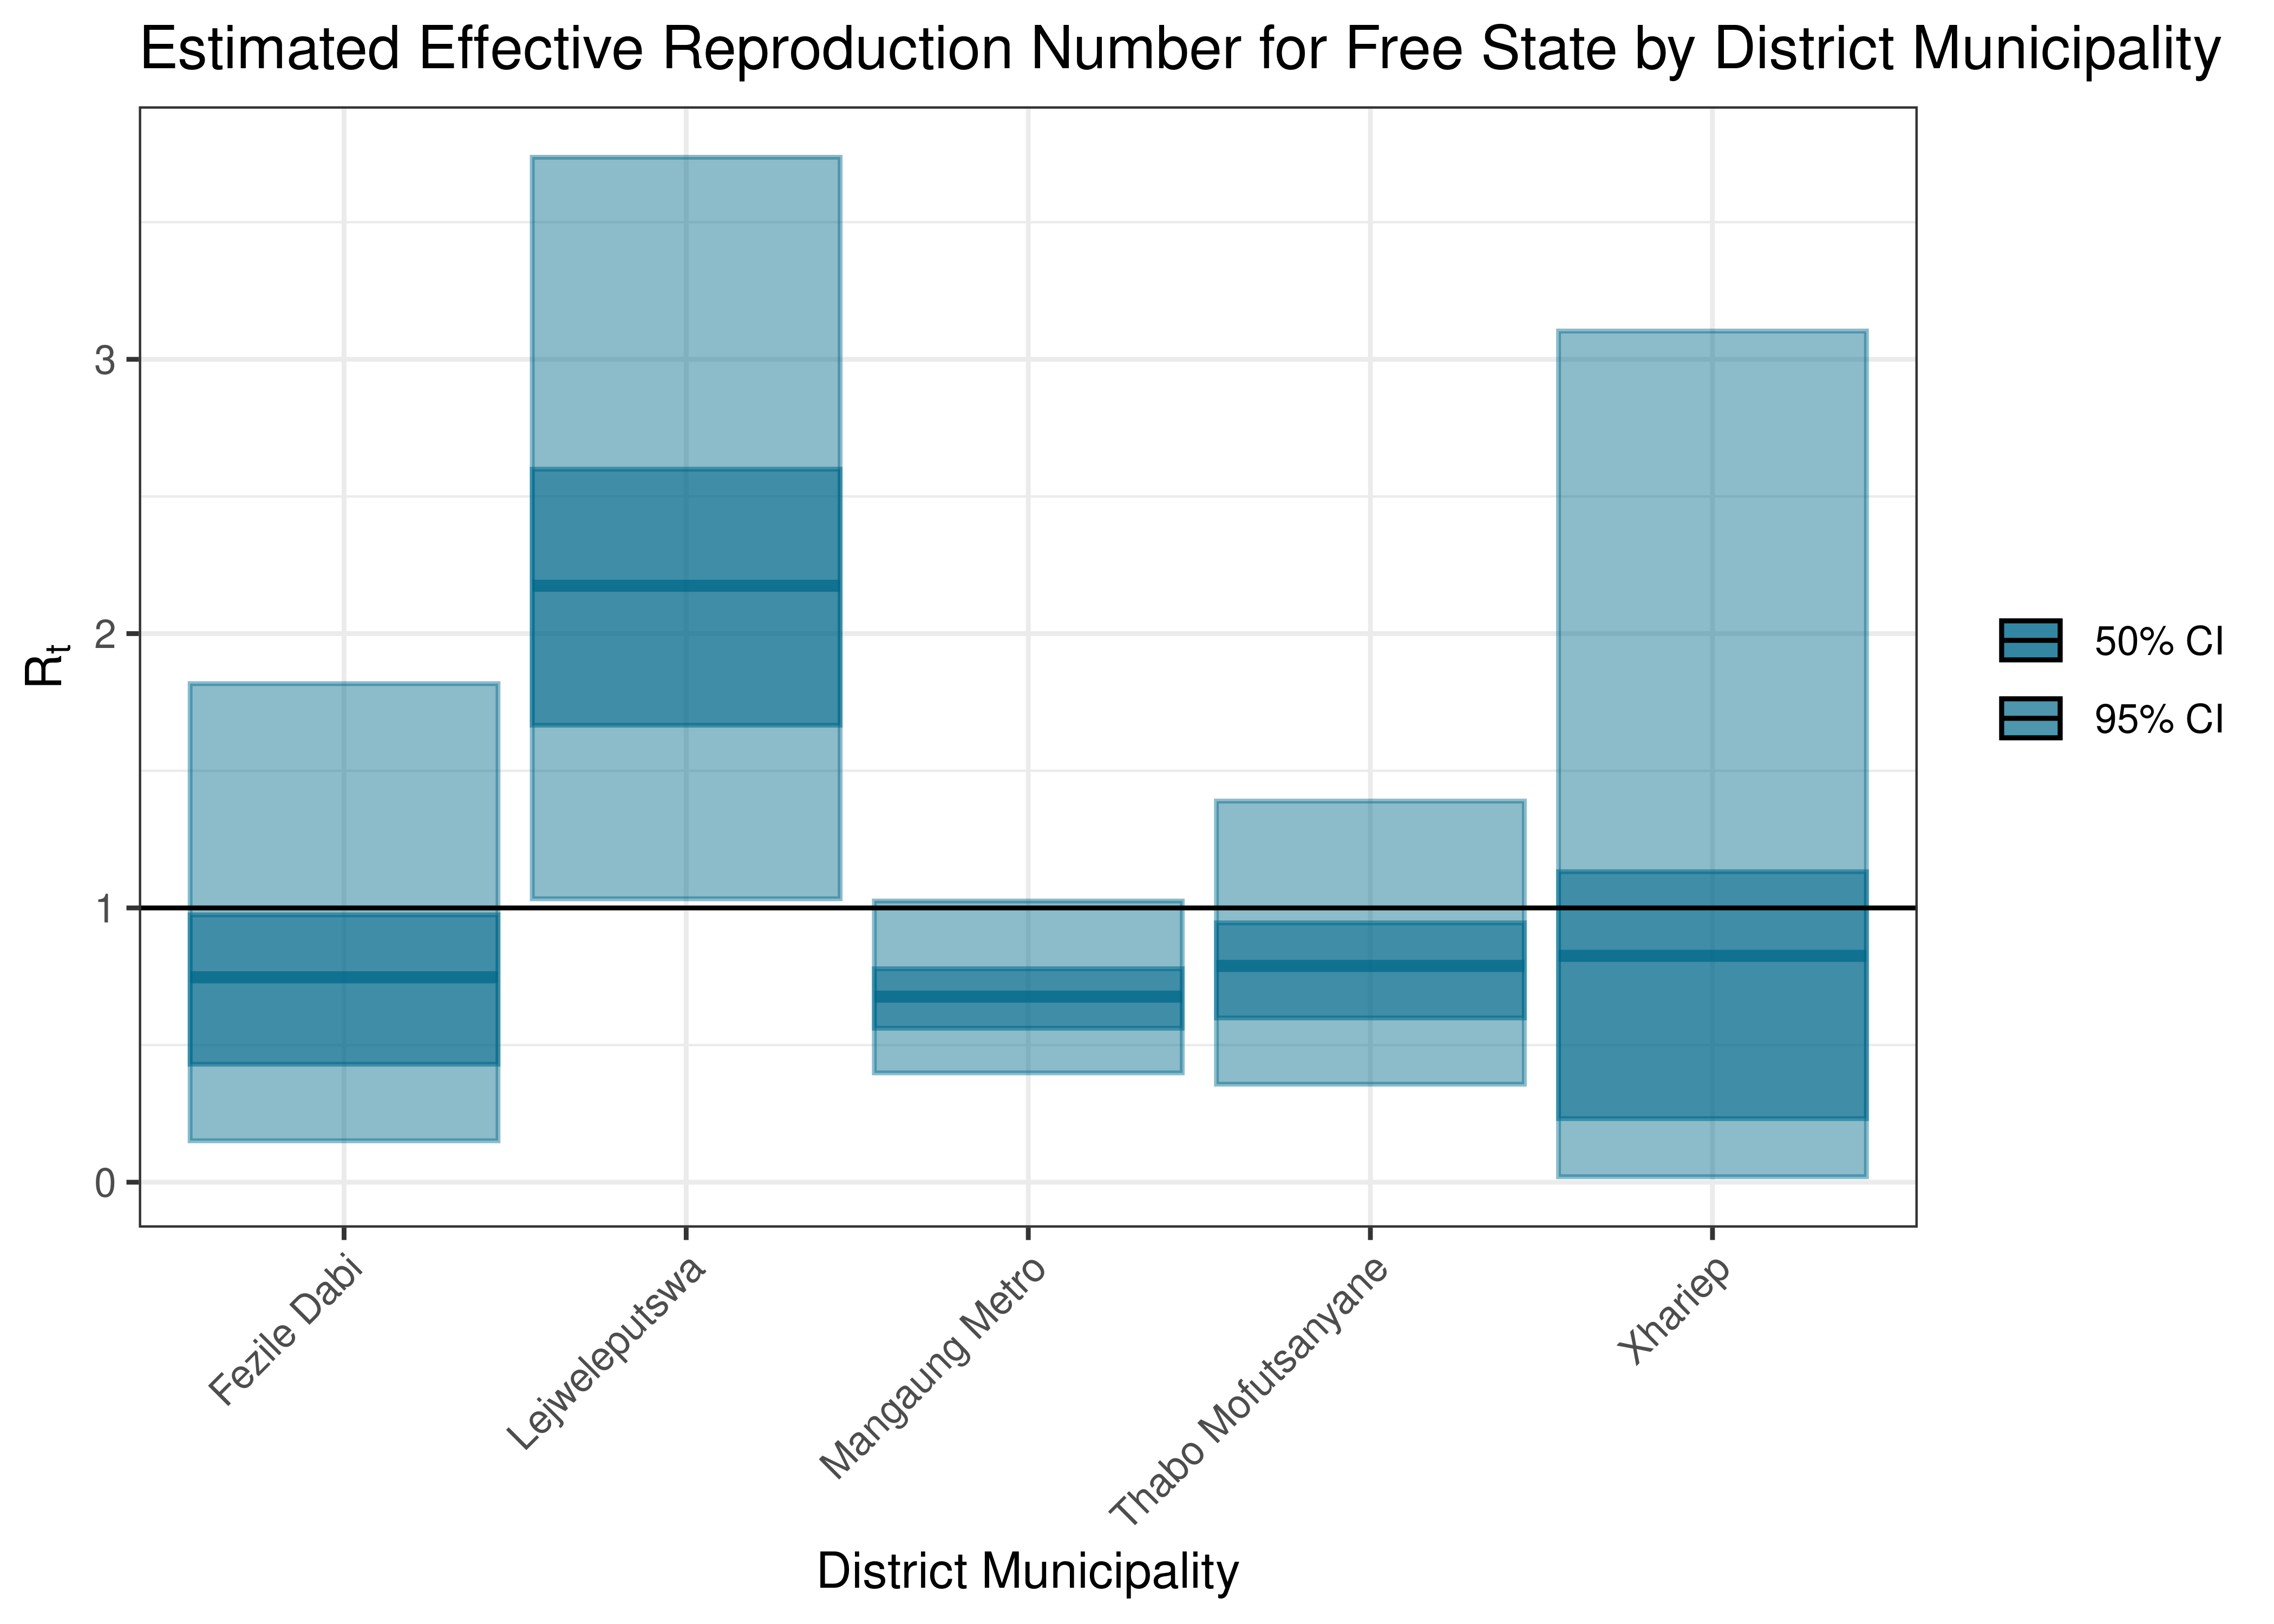 Estimated Effective Reproduction Number for Free State by District Municipality